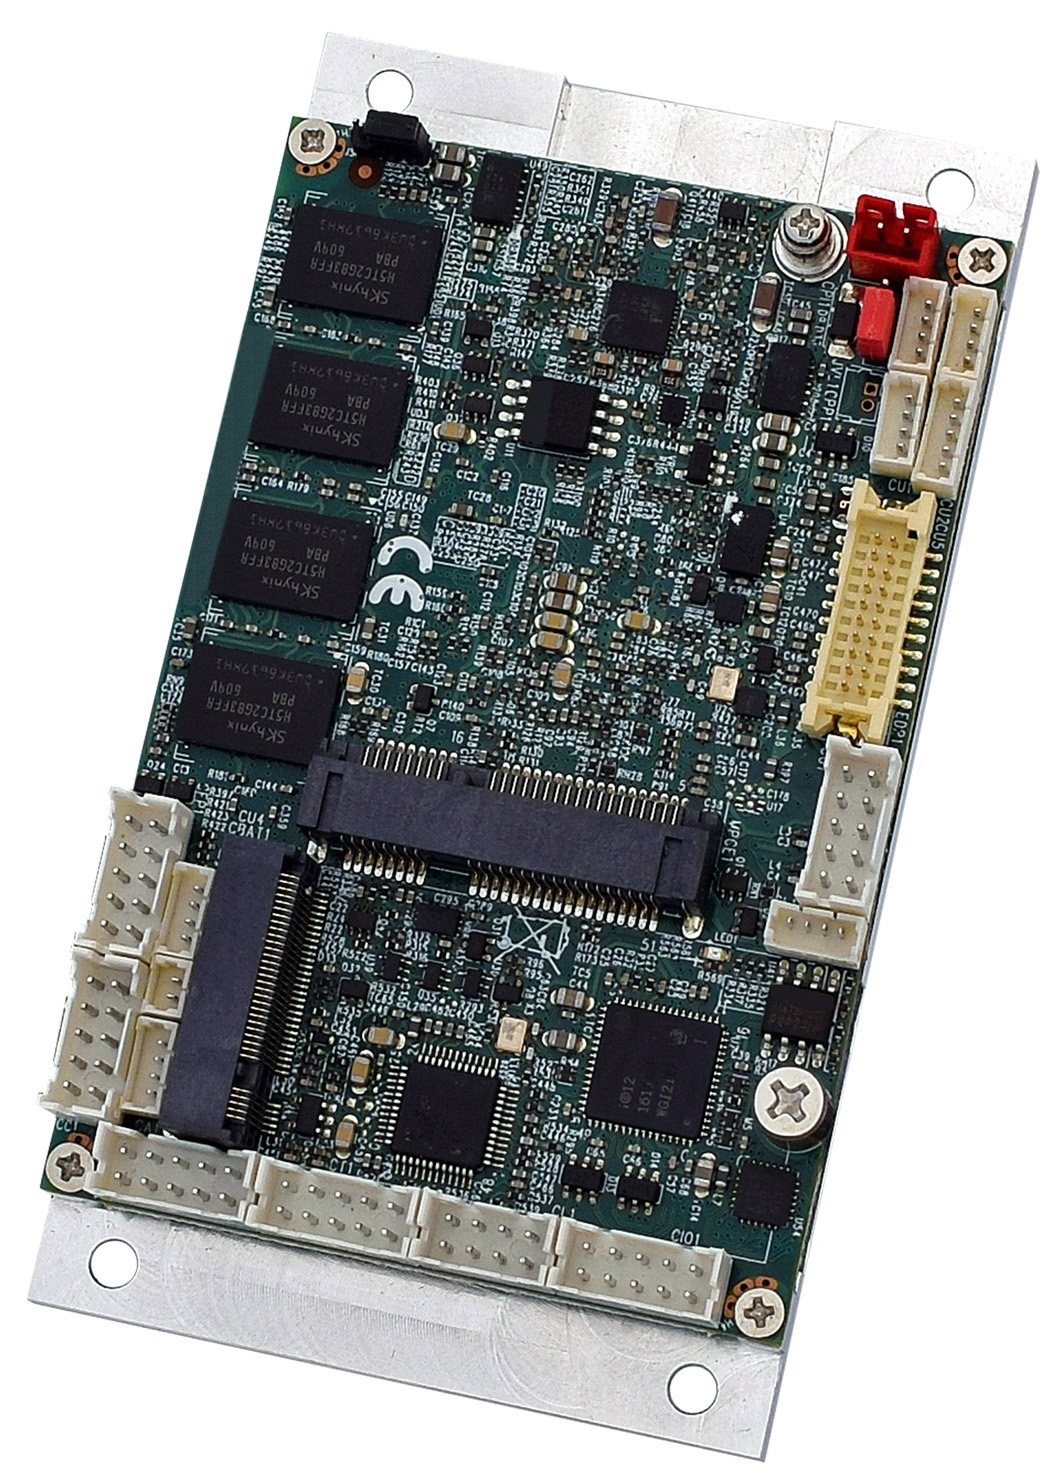 WinSystems Launches Ultra-Small Form Factor Single Board Computer With Multiple Expansion Options for Design Versatility